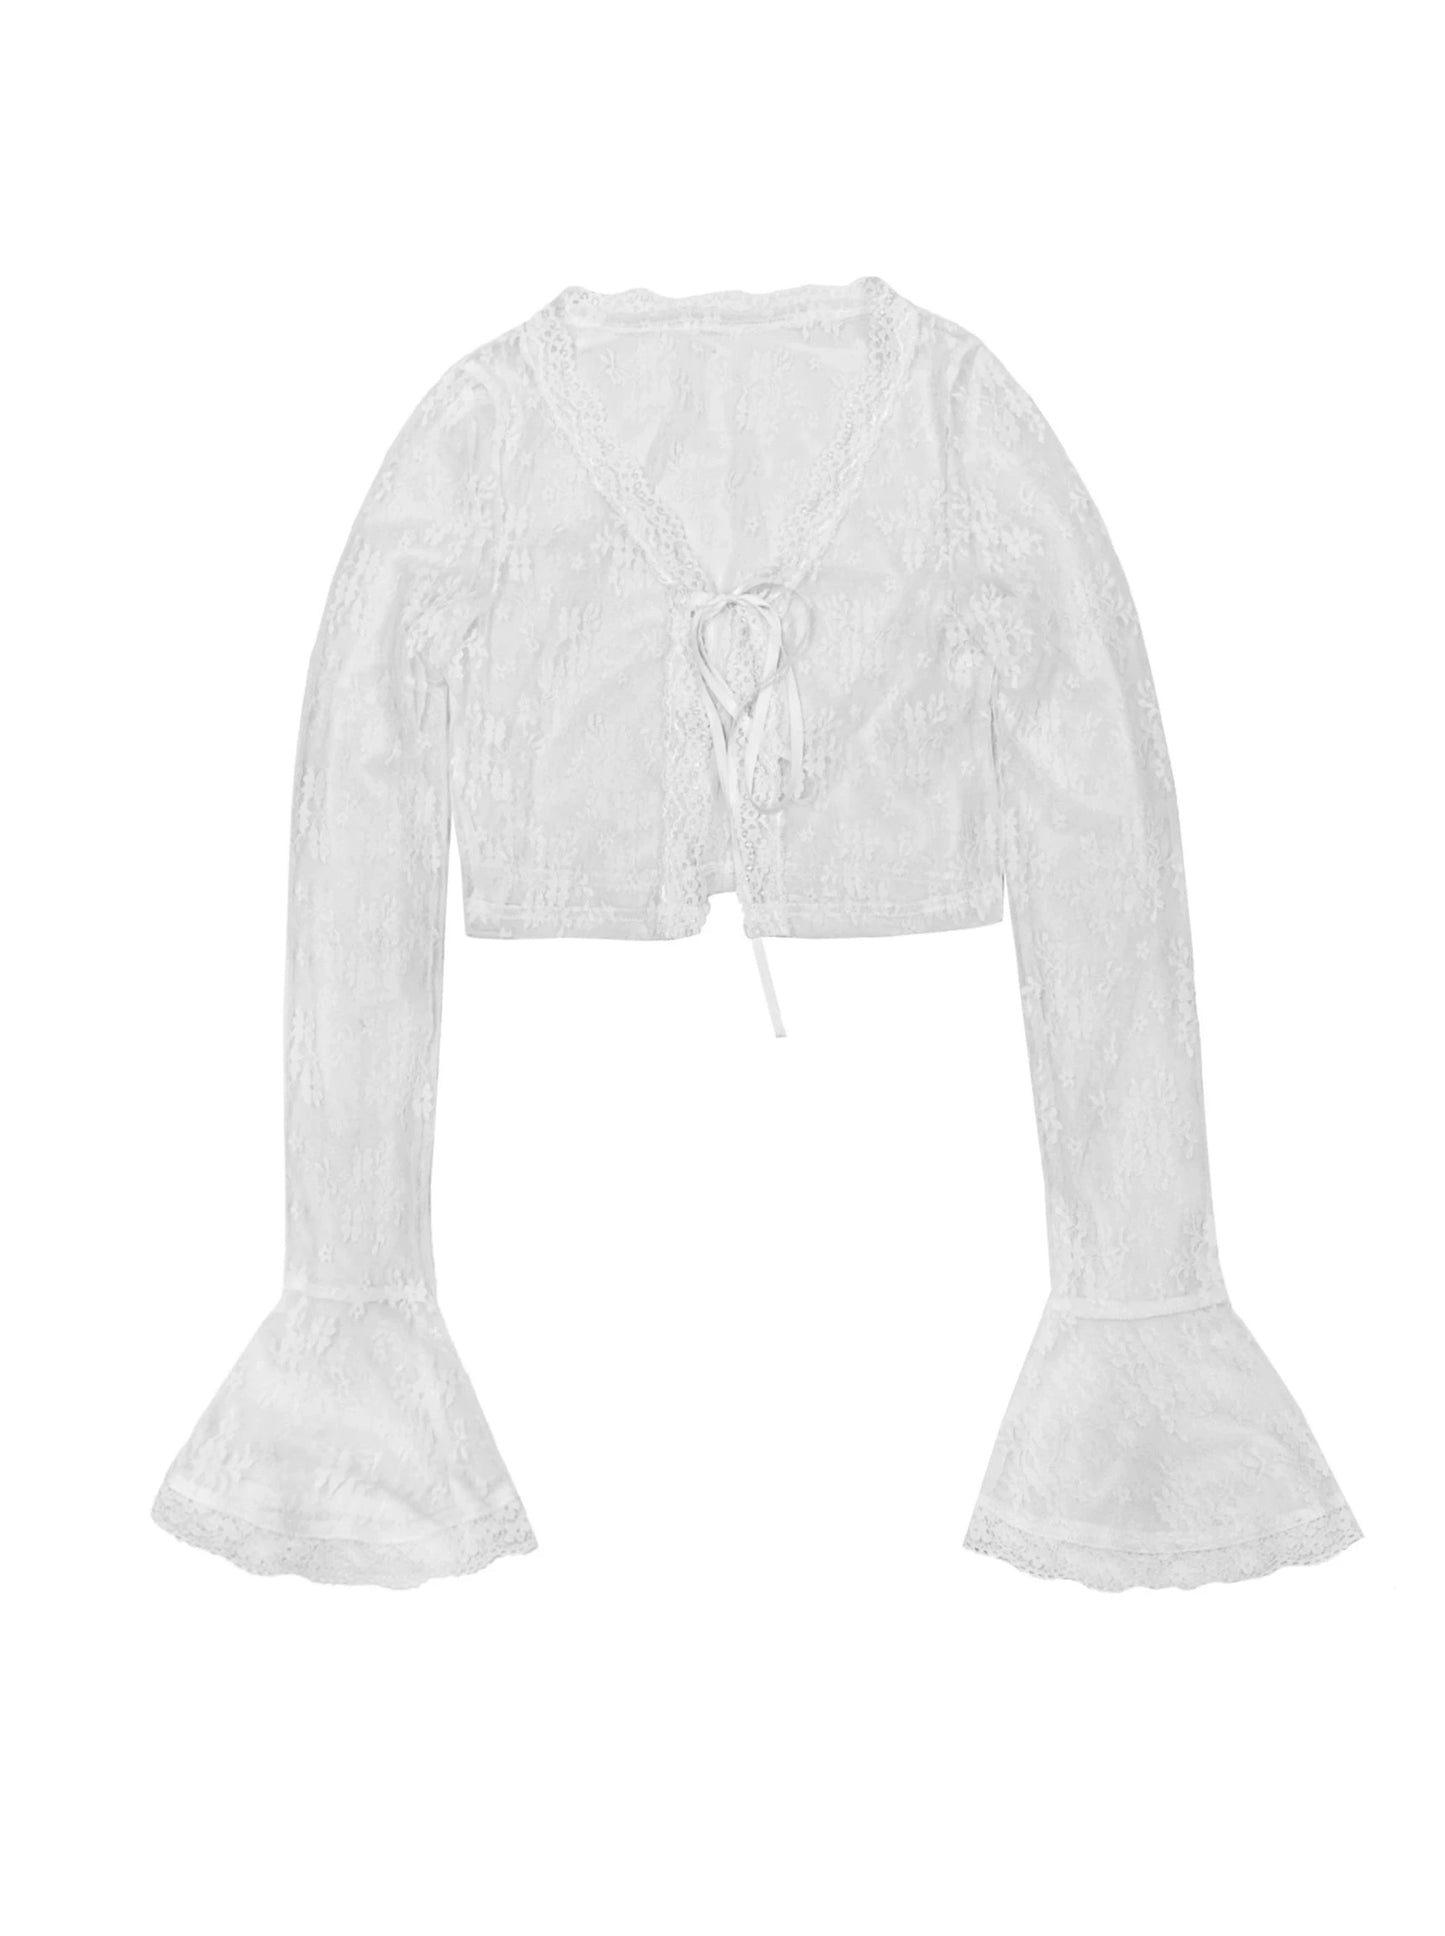 [Spot]Fragile store weekend slightly drunk lace new cardigan looks thin fairy holiday sunscreen jacket